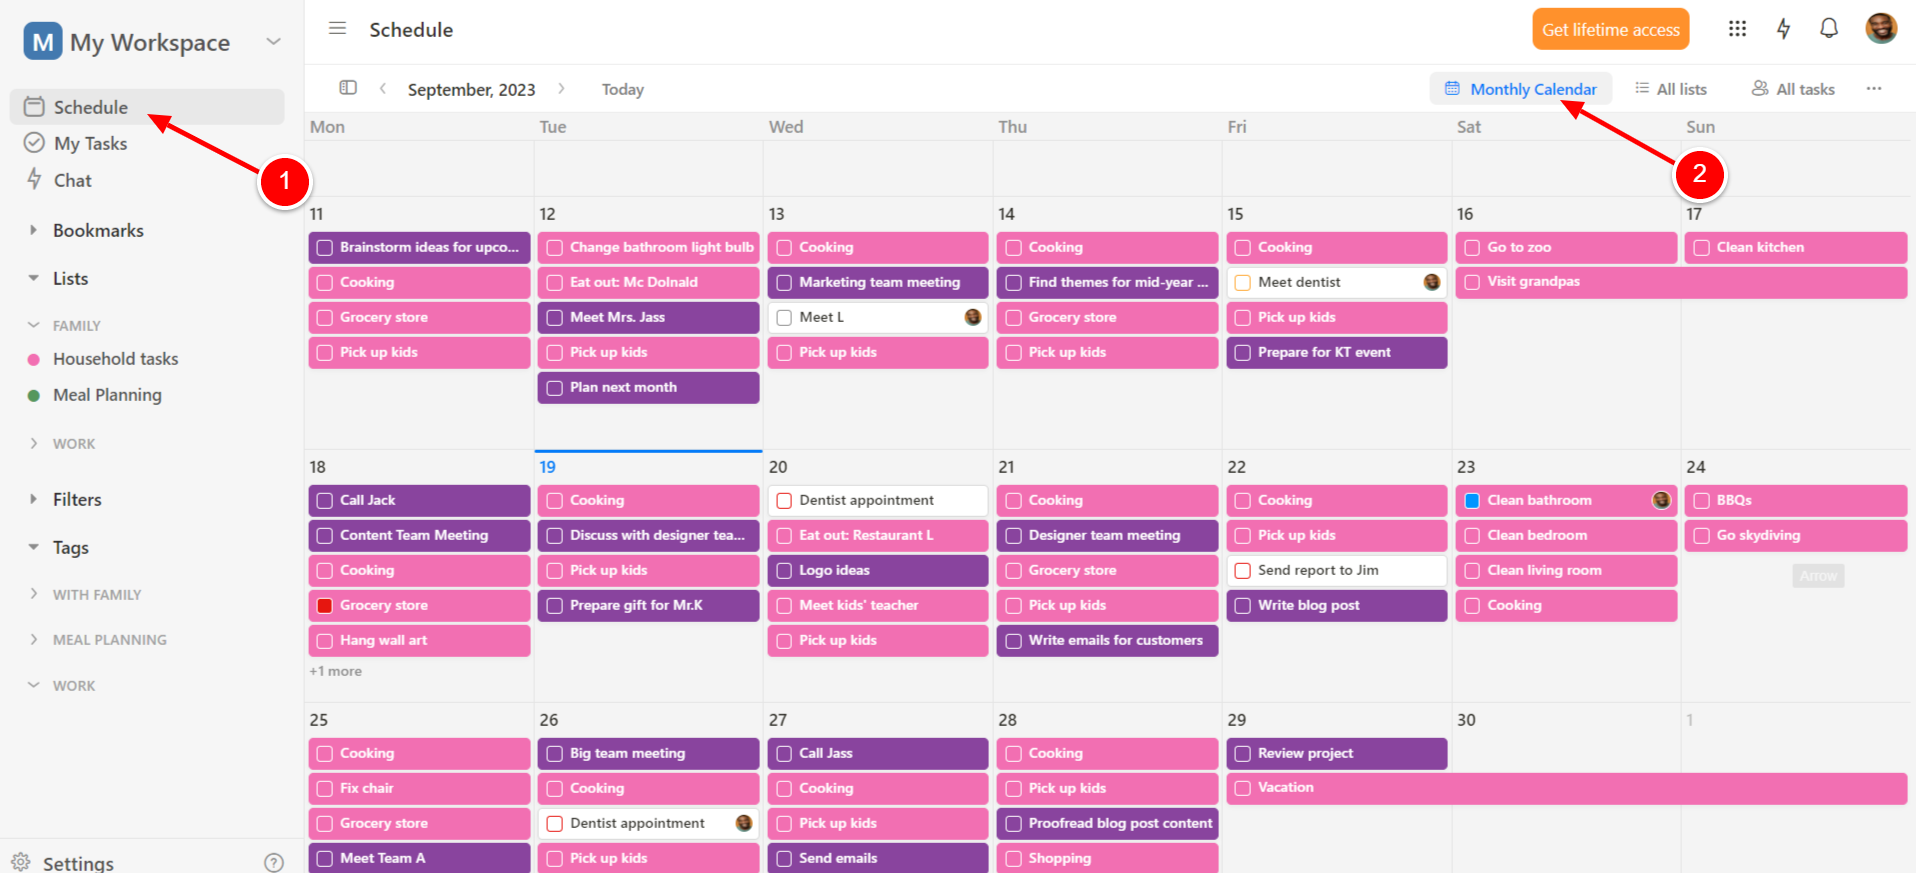 Upbase's Monthly Calendar view, making it a great family shared calendar app